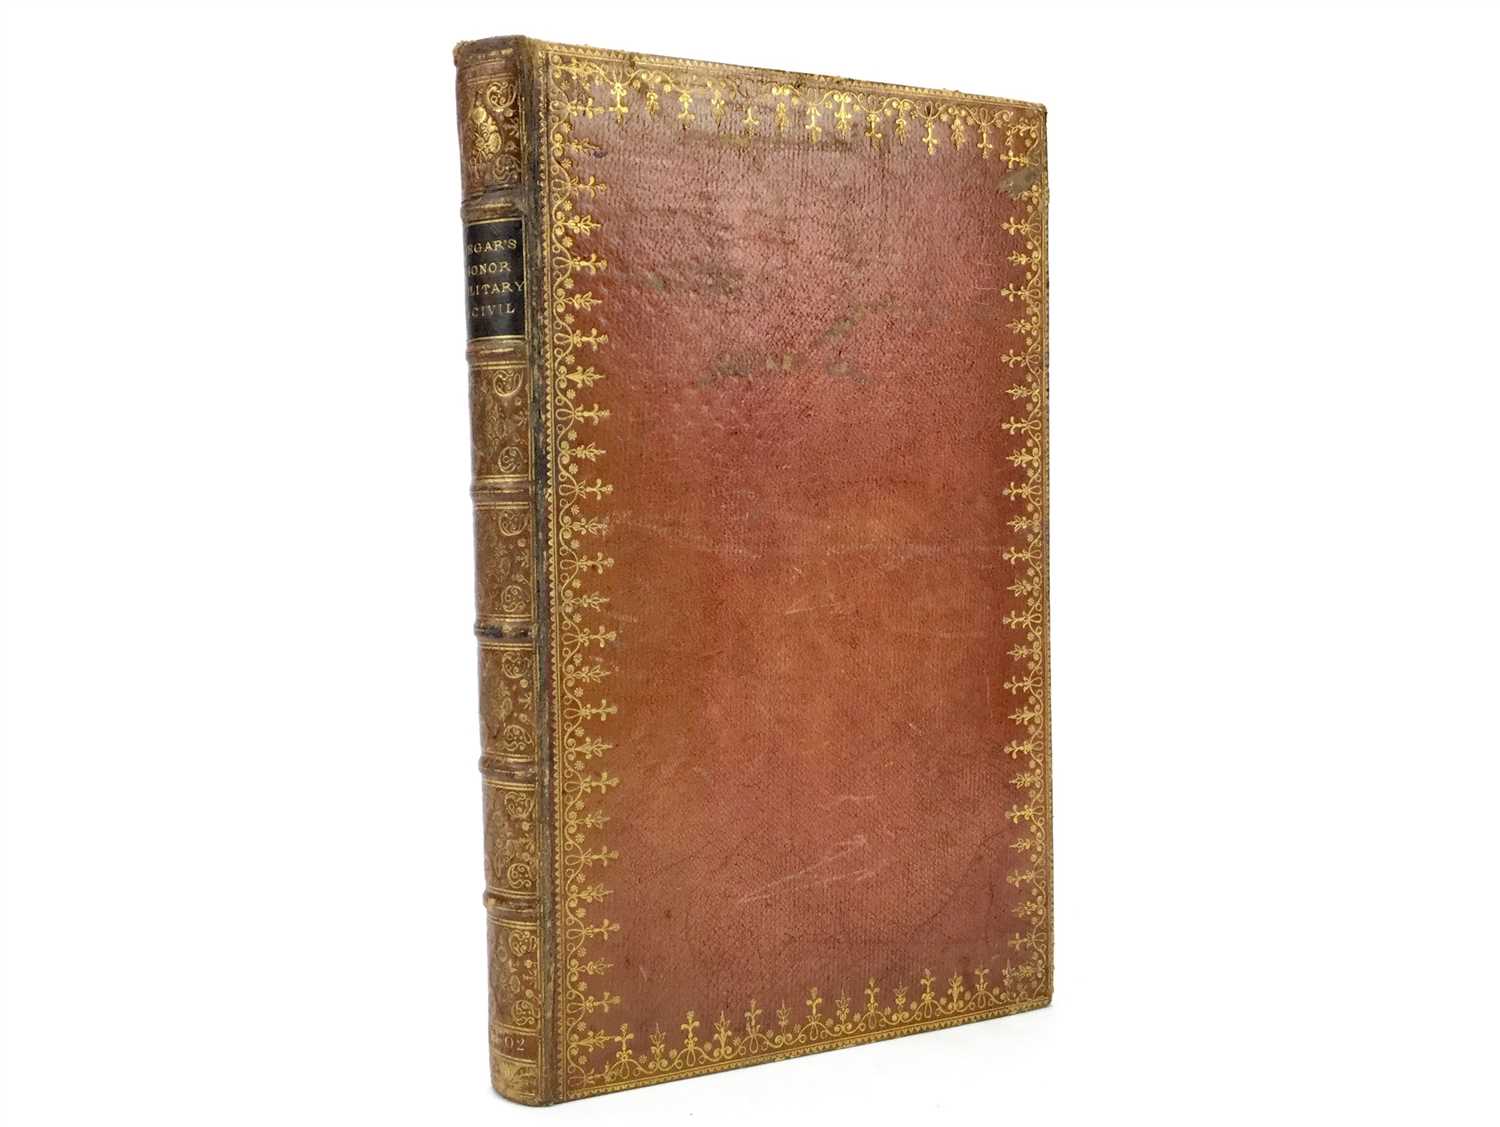 Lot 1581 - HONOR MILITARY, AND CIVILL, BY SIR WILLIAM SEGAR